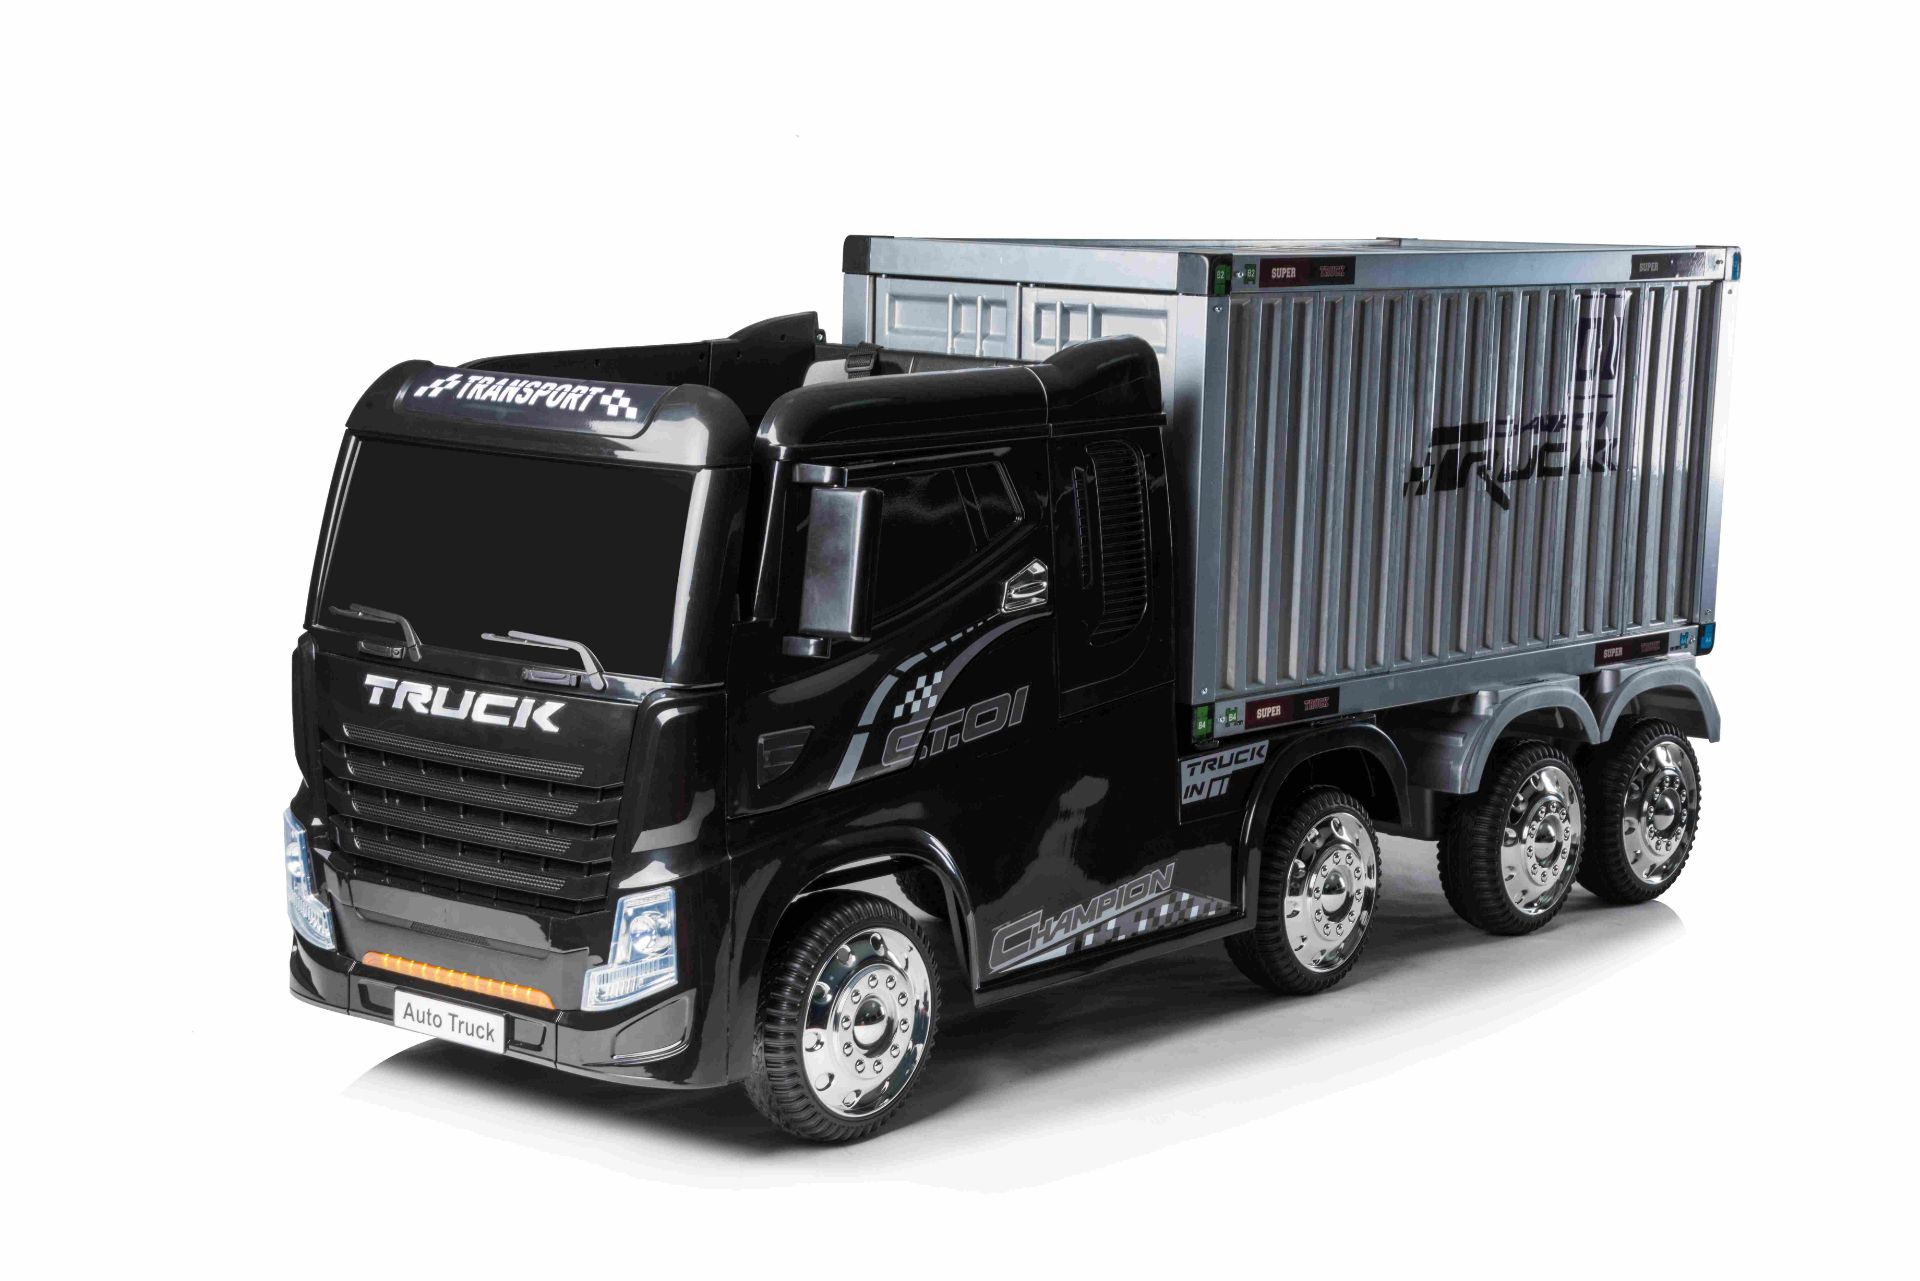 RIDE ON TRUCK WITH DETACHABLE CONTAINER AND PARENTAL REMOTE CONTROL 12V 4 WHEEL DRIVE JJ2011 - BLACK